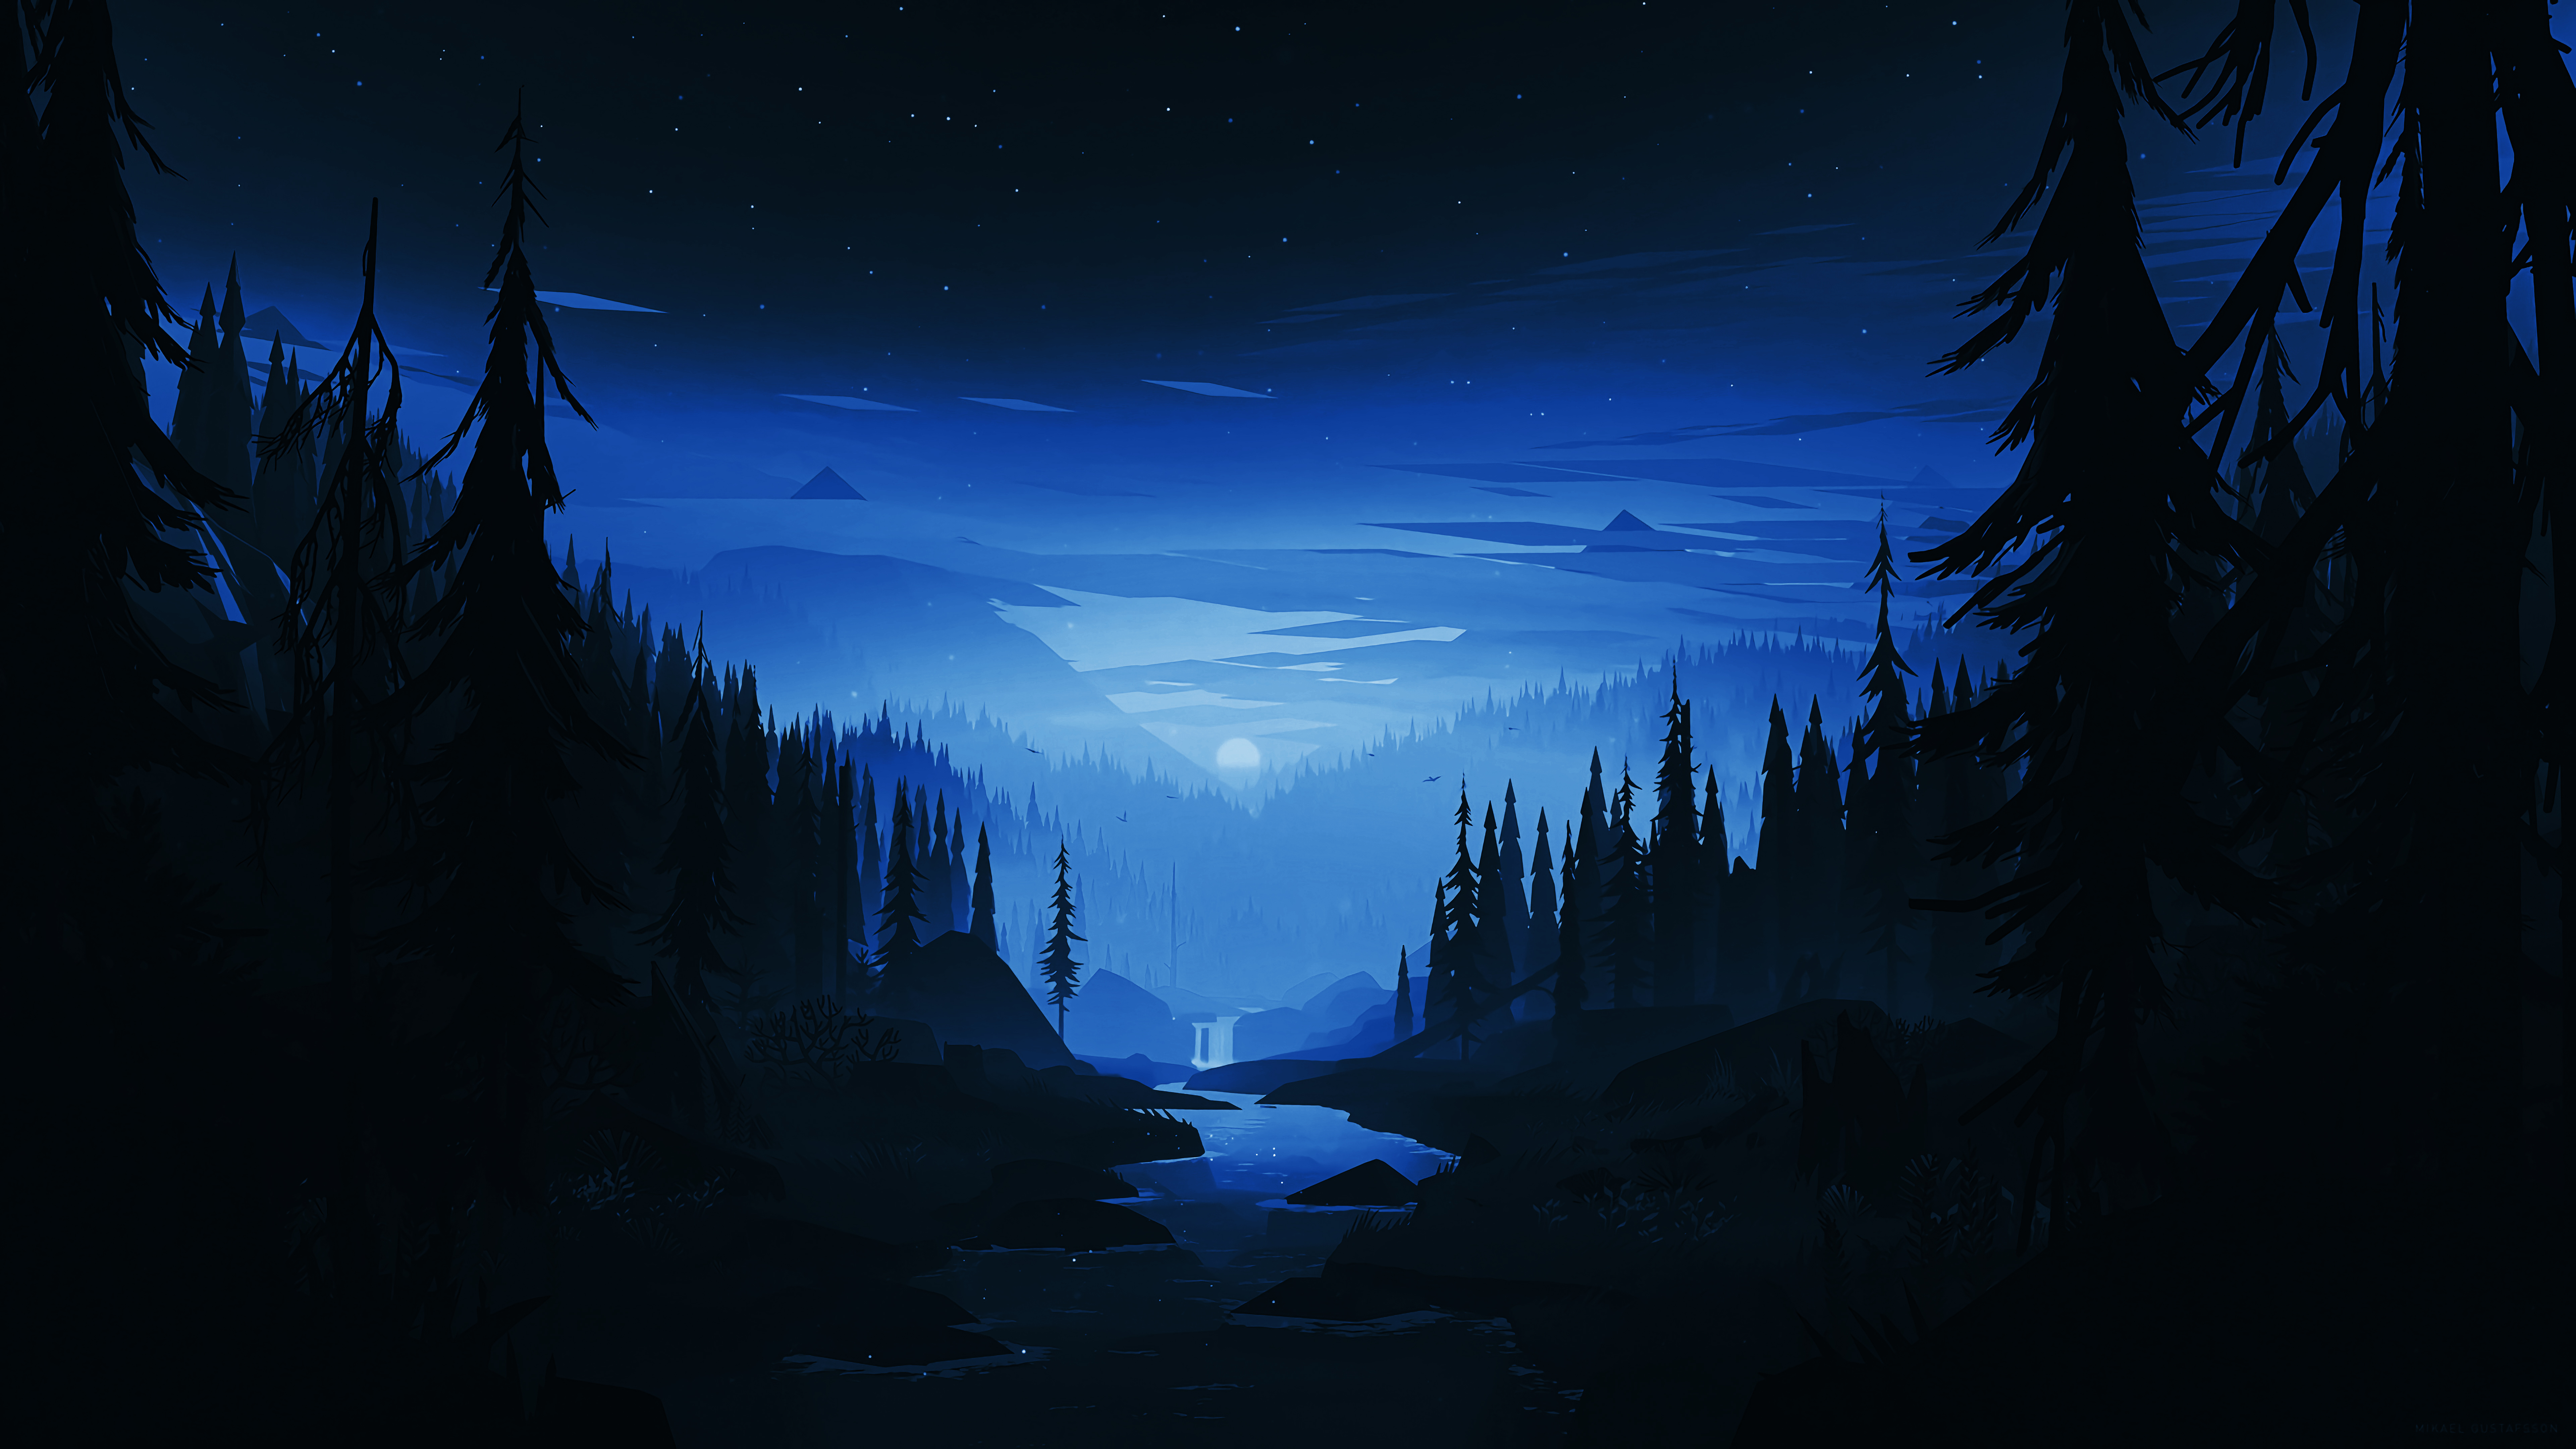 7680x4320 Small Memory Evening 8k 8k HD 4k Wallpapers, Images